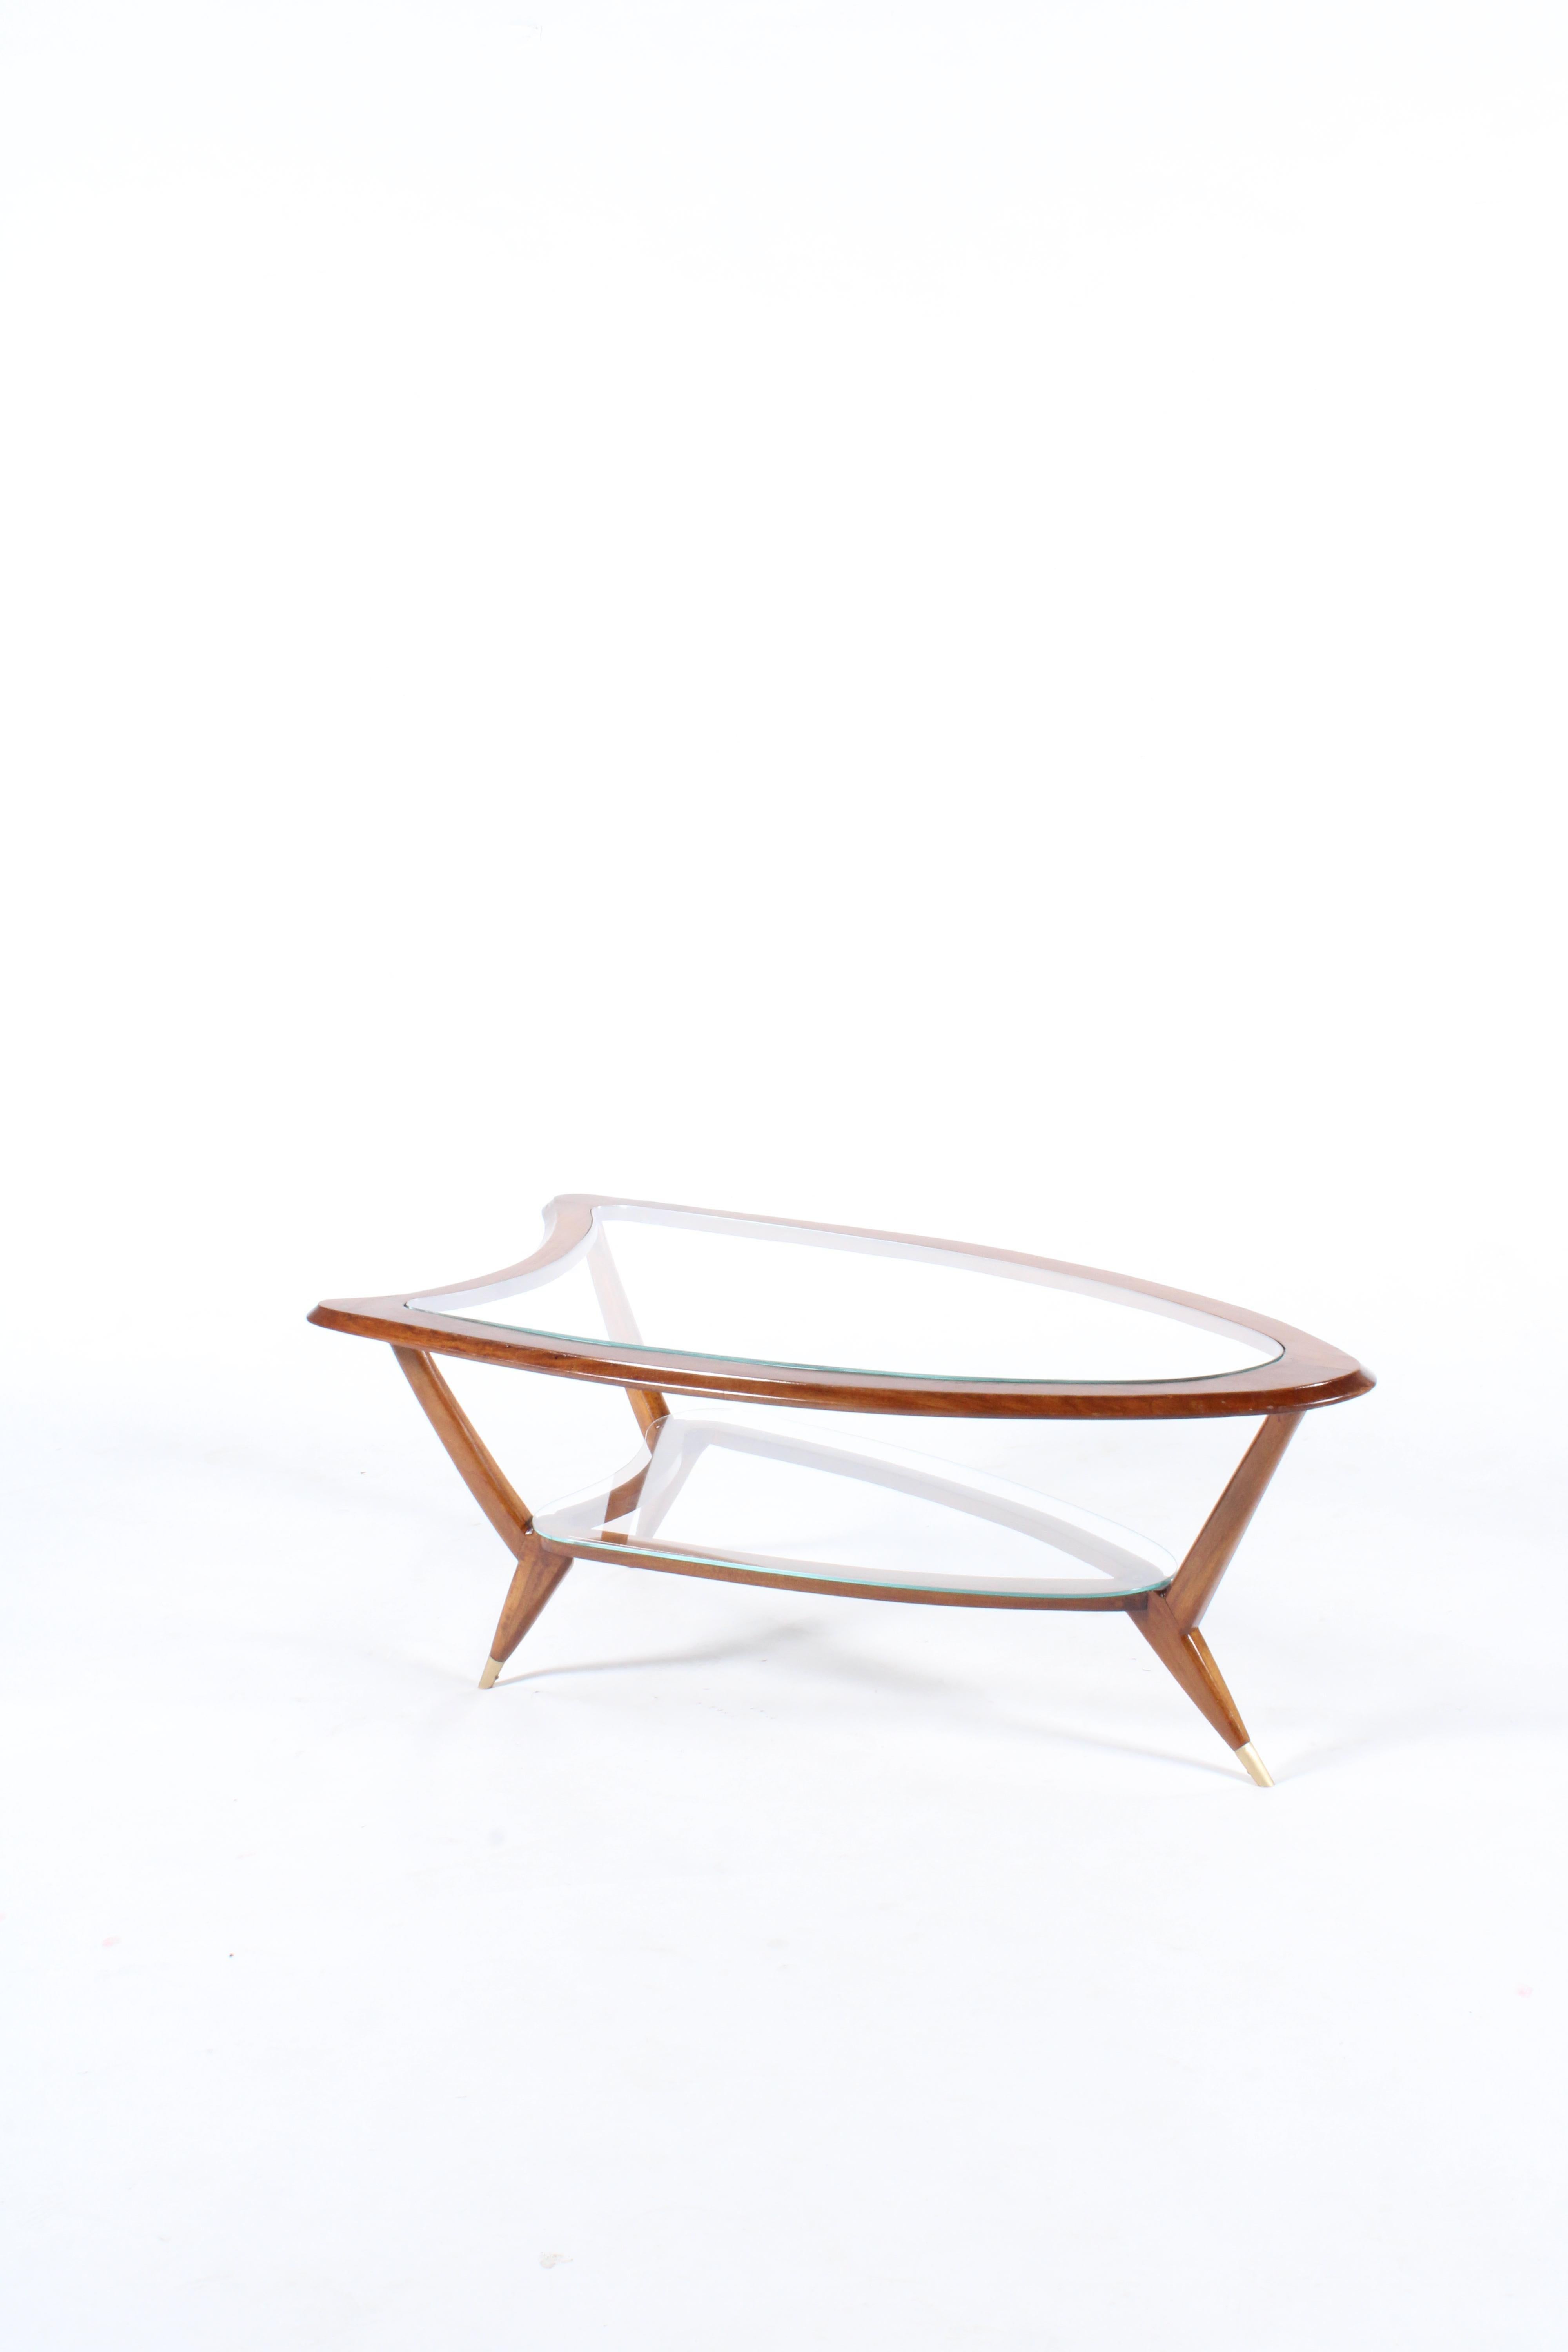 Hand-Crafted Stylish Organic Form Mid Century Italian Coffee Table * Free Worldwide Delivery For Sale